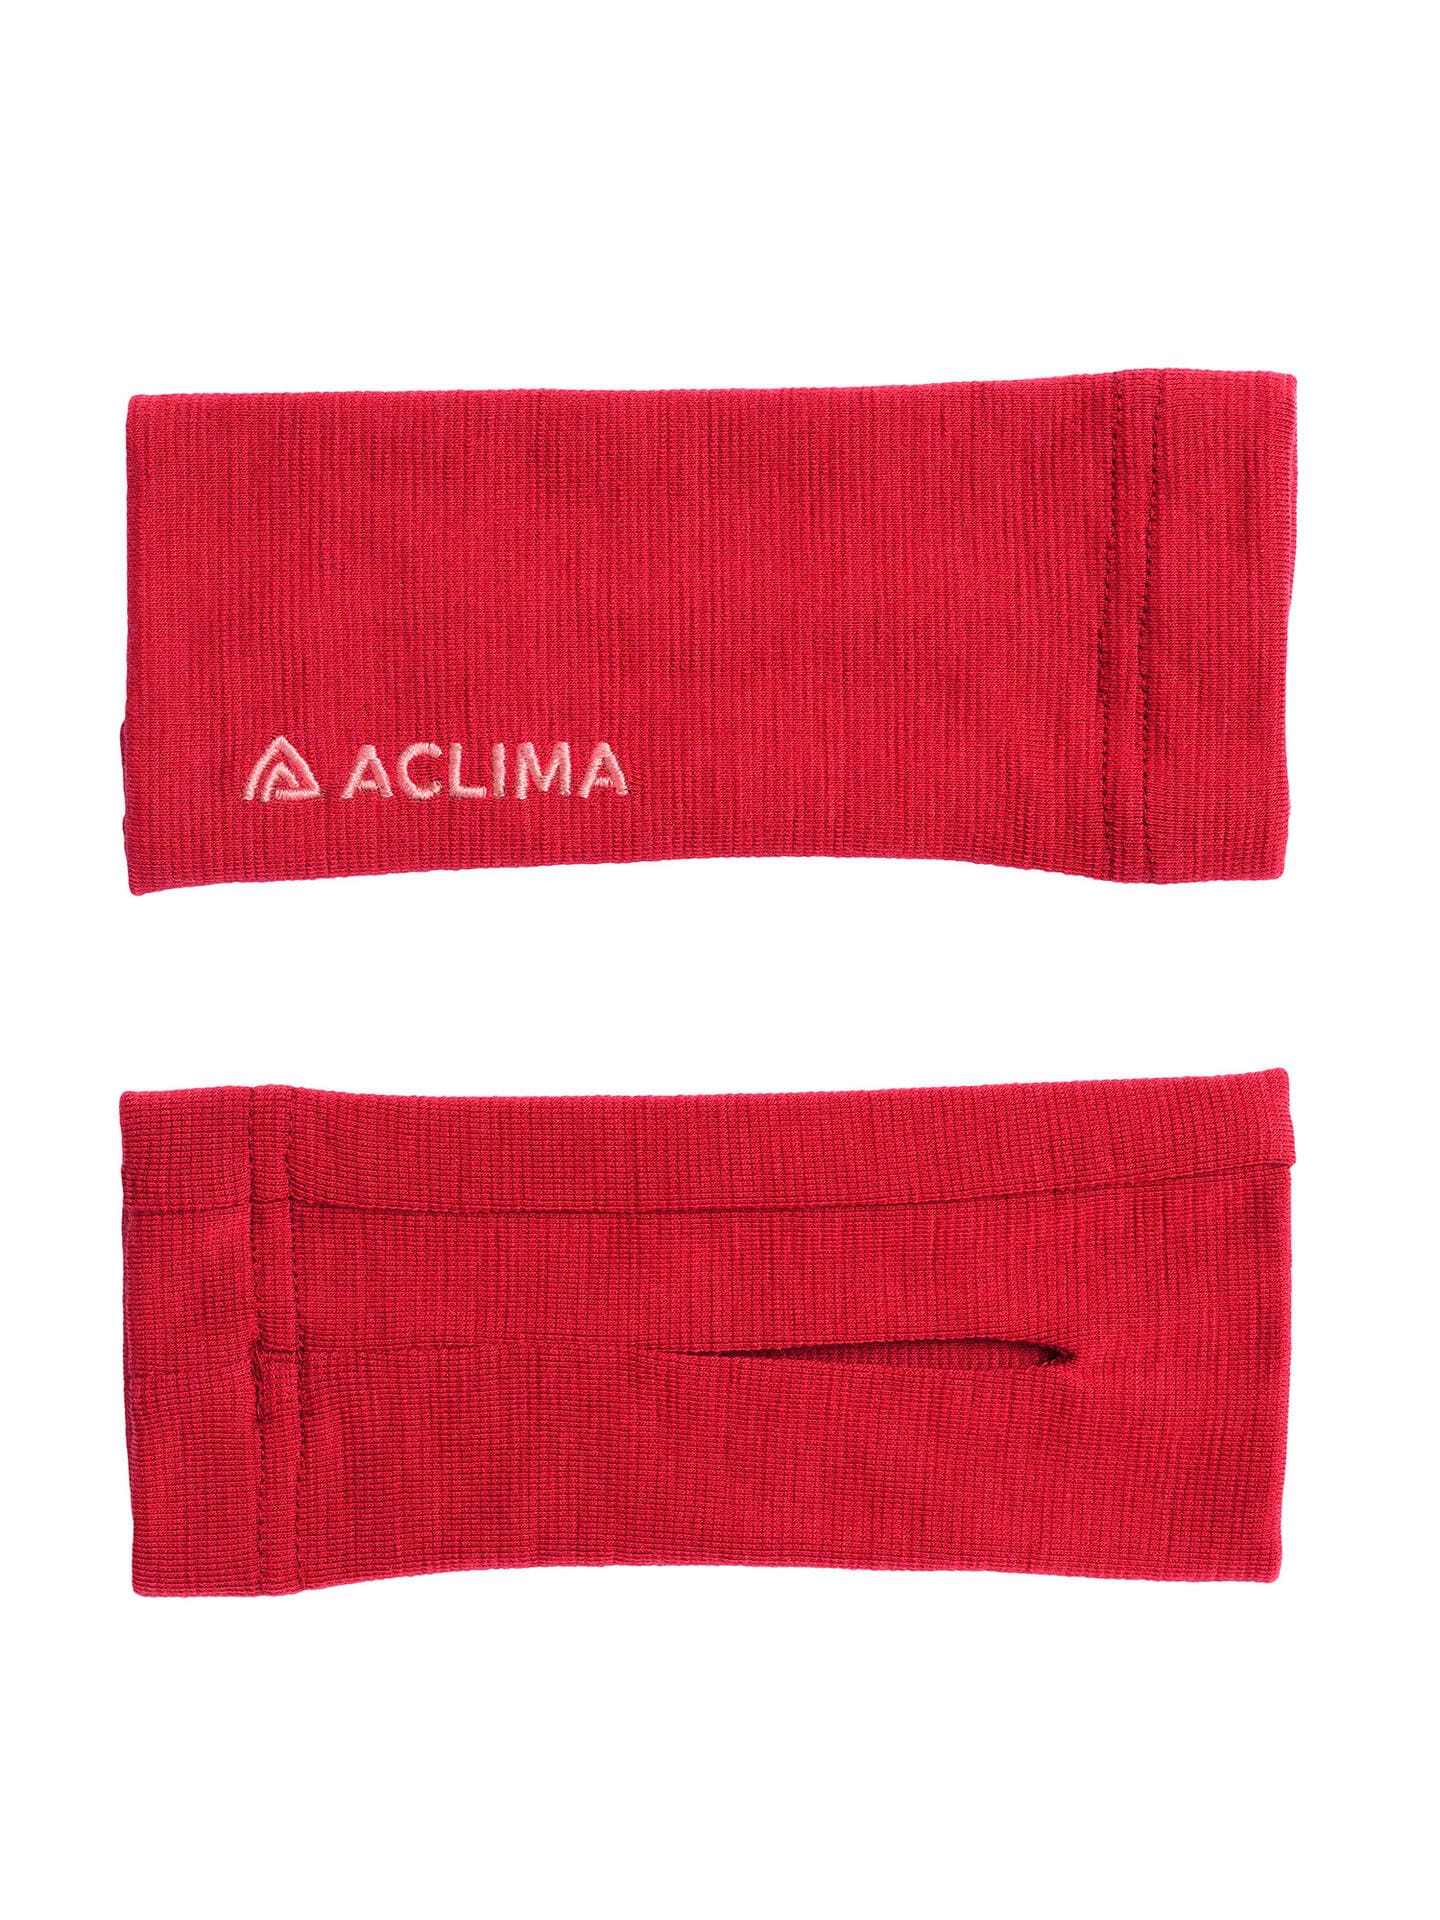 Aclima WarmWool Pulseheater Jester Red